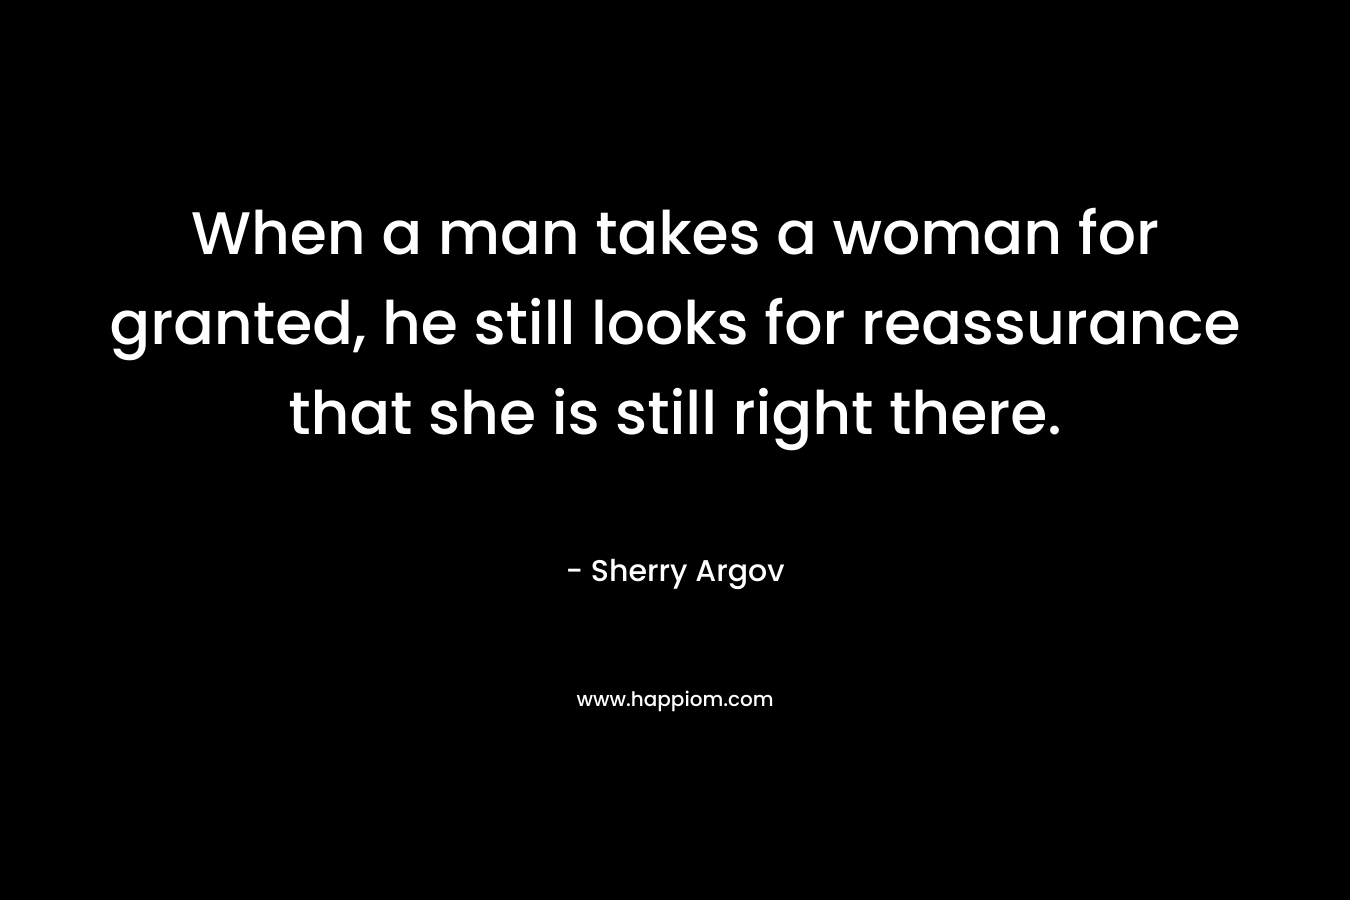 When a man takes a woman for granted, he still looks for reassurance that she is still right there. – Sherry Argov